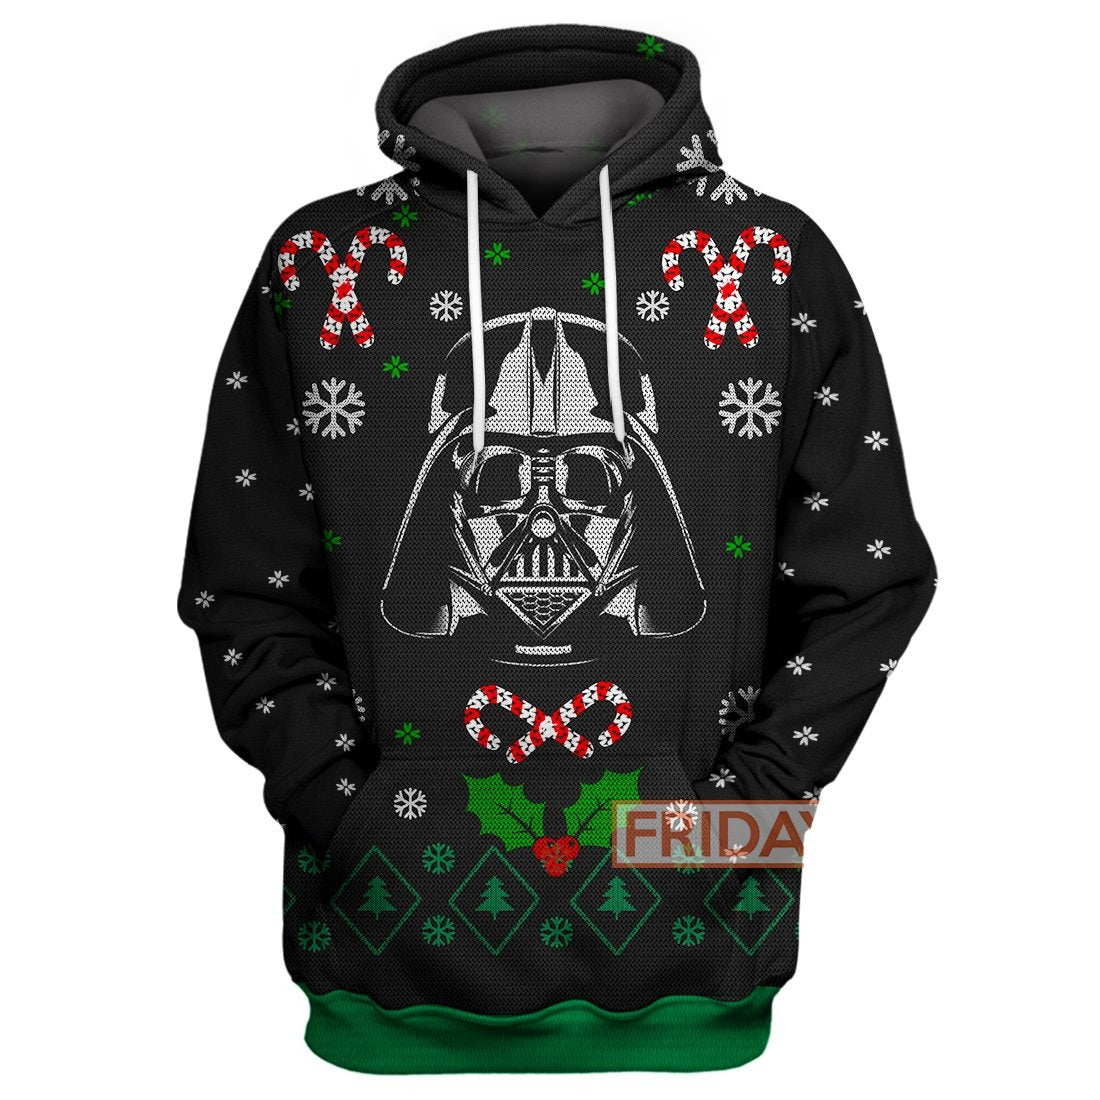 Unifinz SW T-shirt Darth Vader Christmas Sweater T-shirt Awesome SW Hoodie Sweater Tank 2022